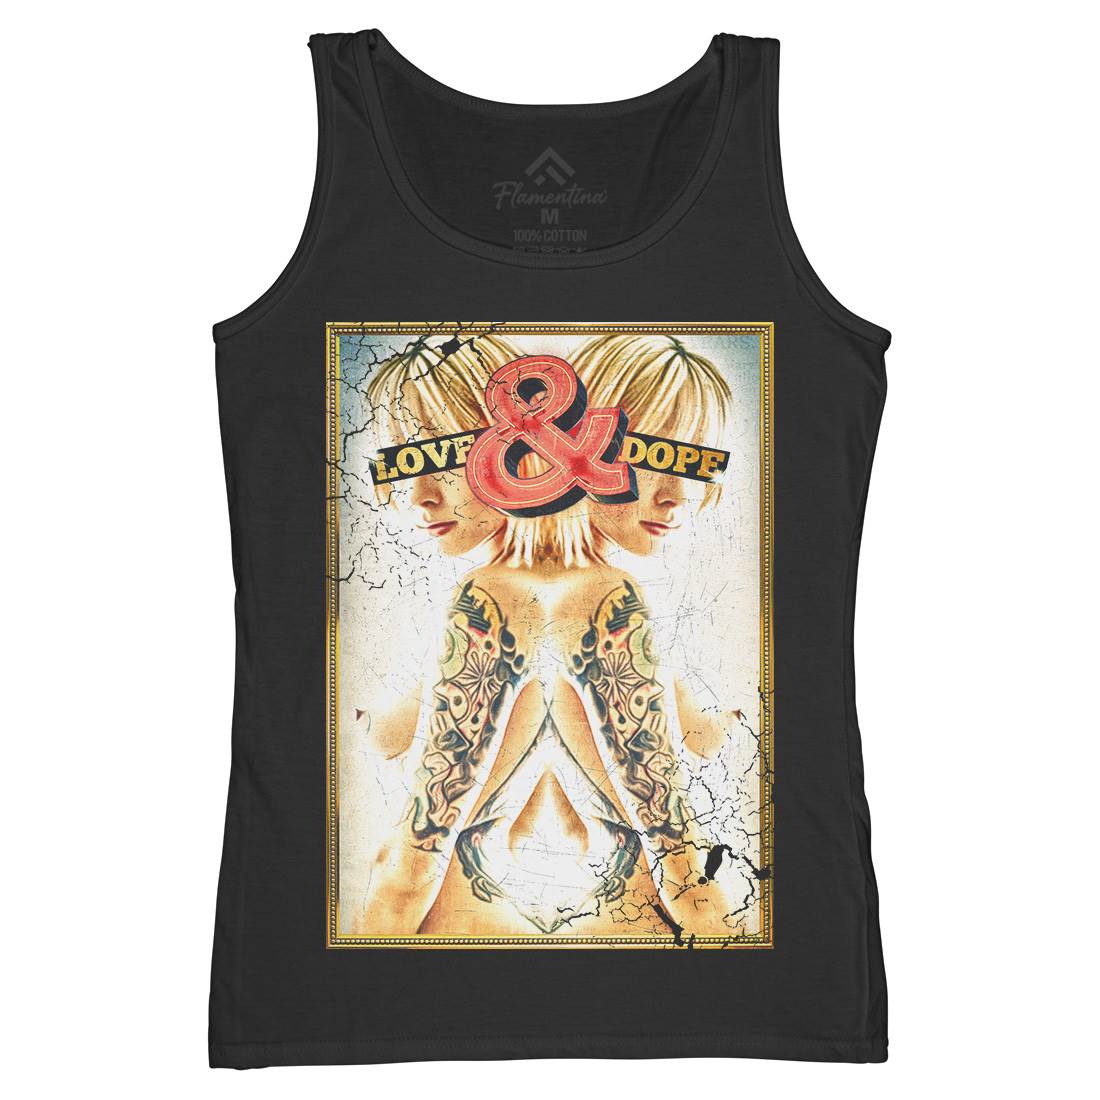 Love And Dope Womens Organic Tank Top Vest Drugs A869